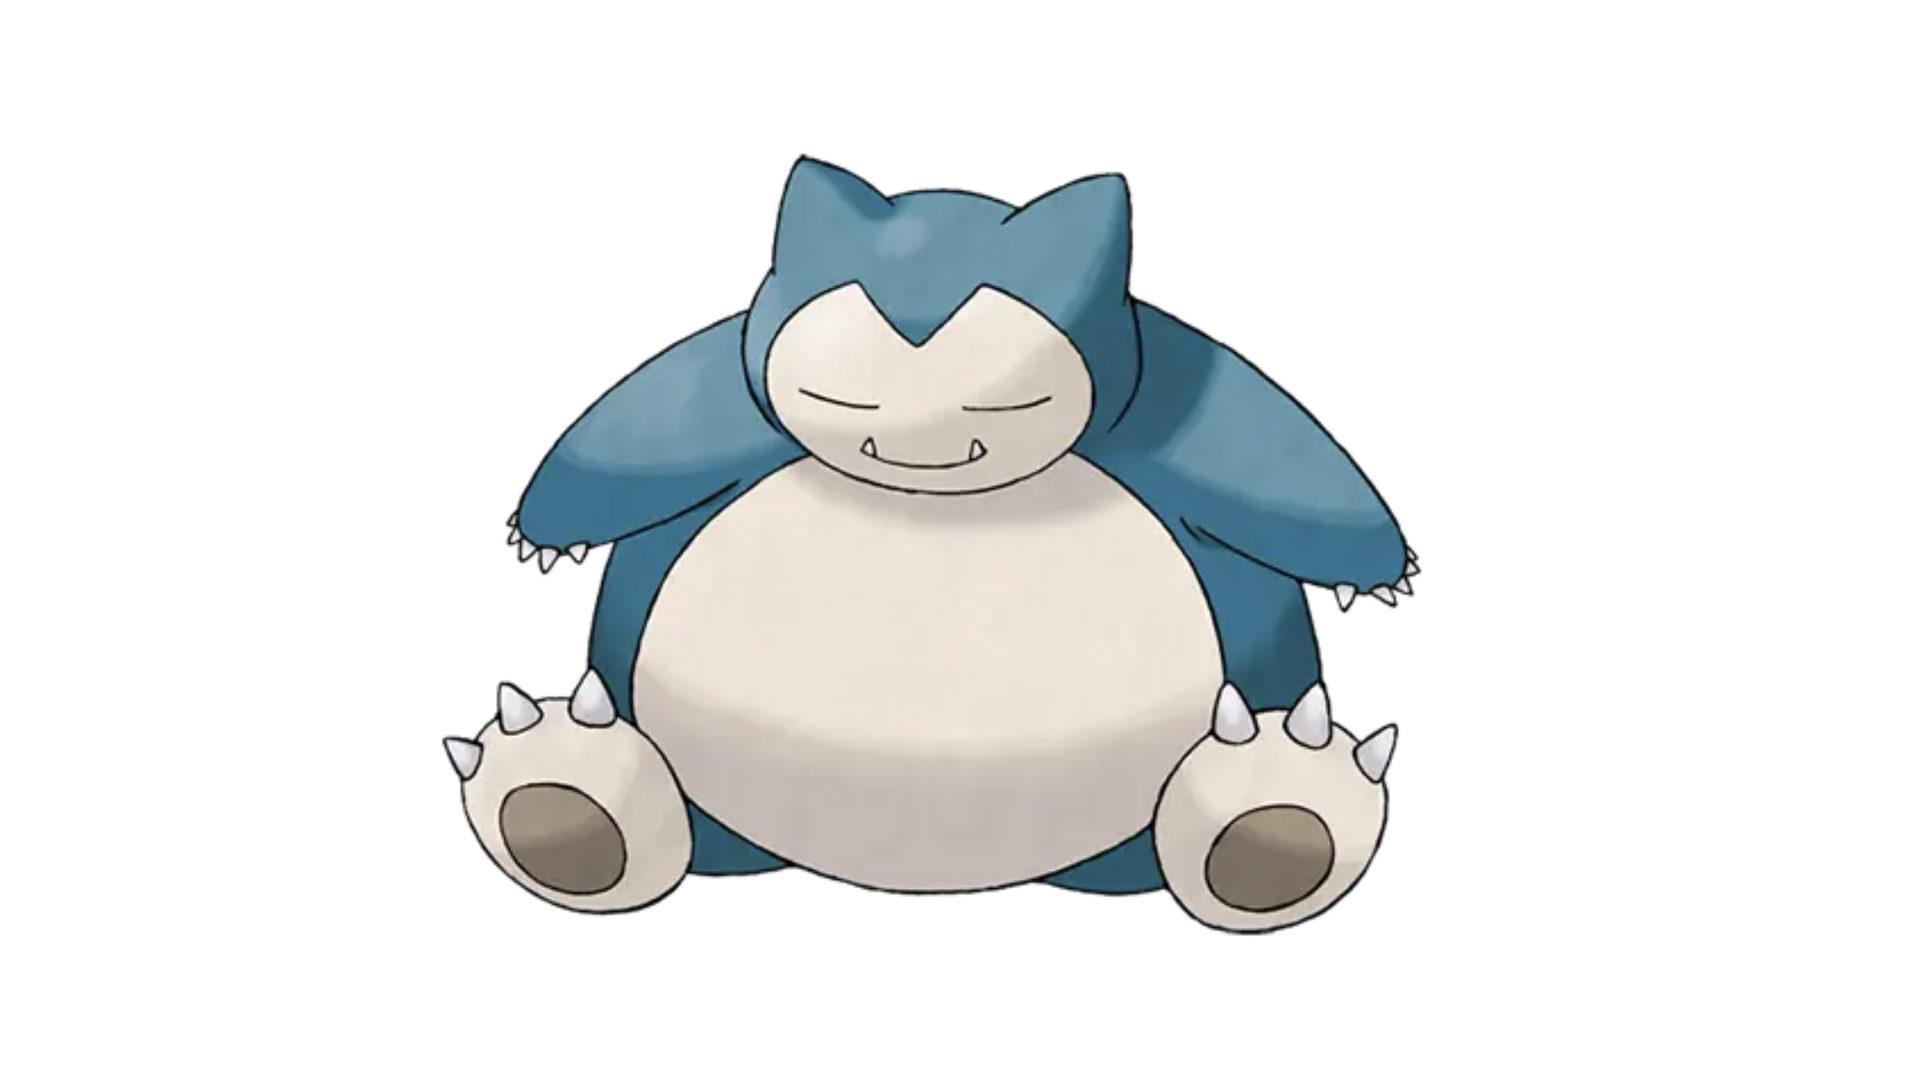 Illustration of the large Pokemon character Snorlax, who sits asleep with his arms out.